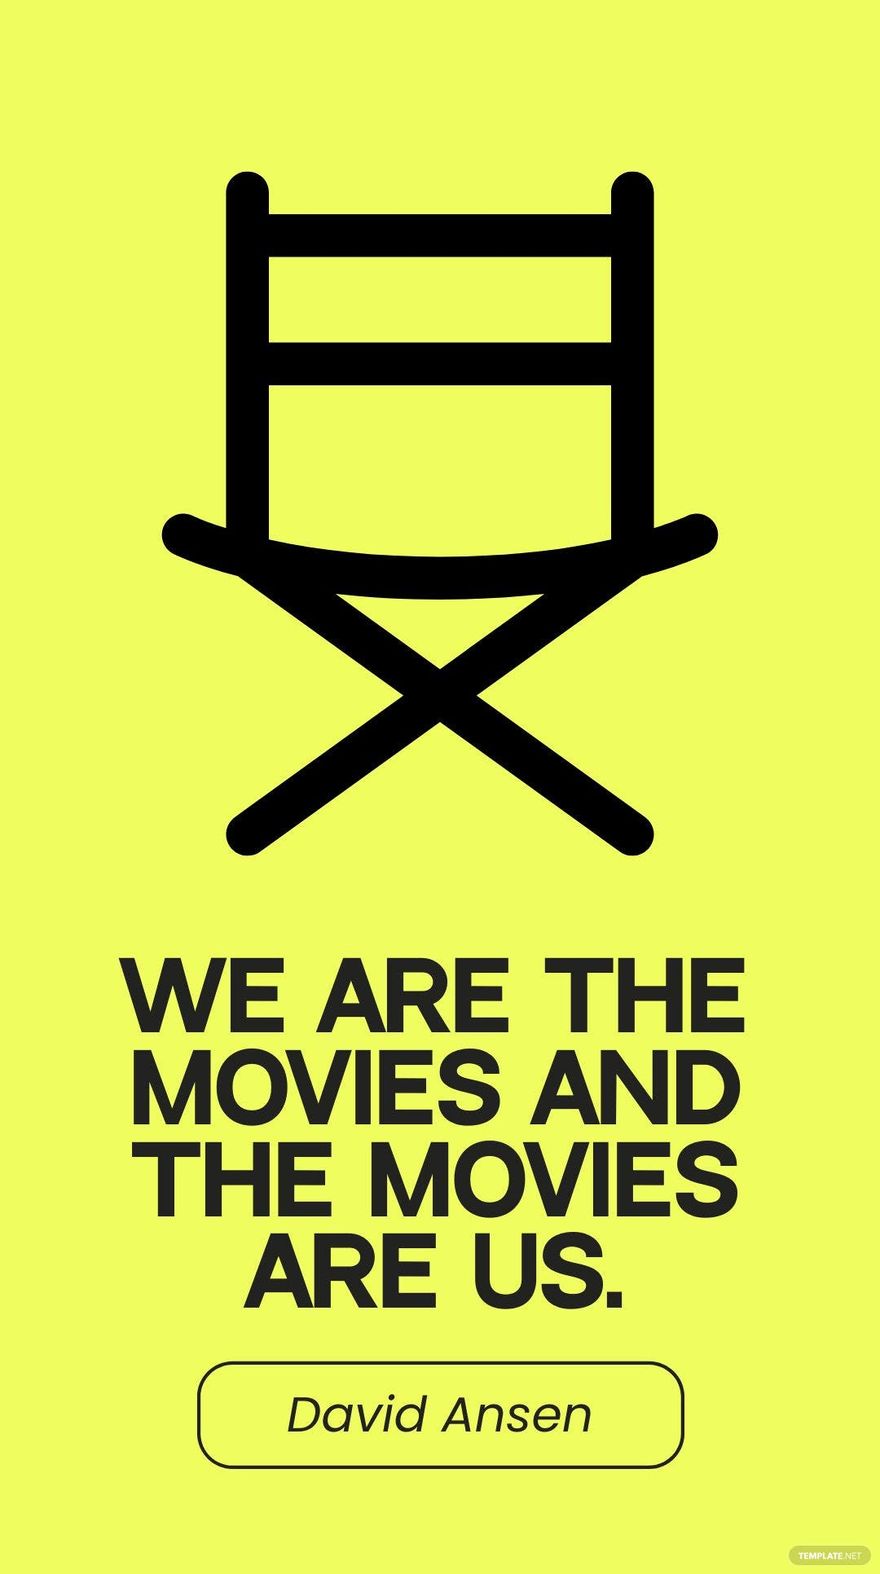 David Ansen - We are the movies and the movies are us.